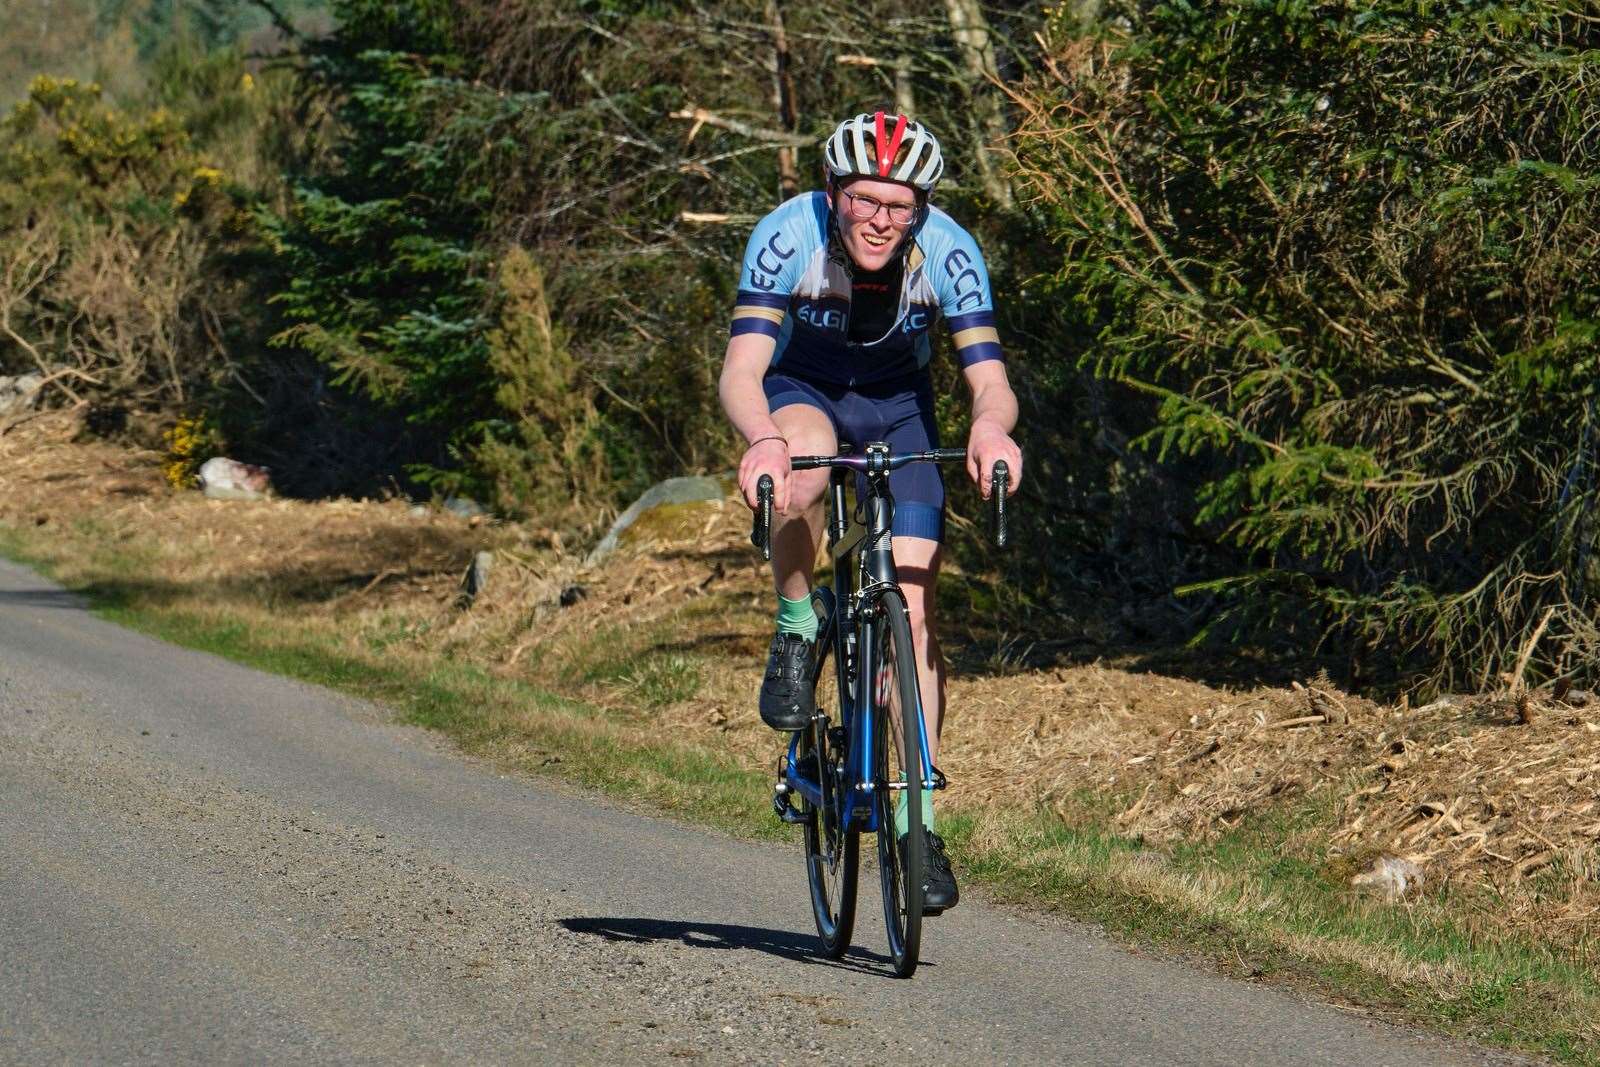 Elgin Cycling Club's Pluscarden Hilly Time Trial. Photo: Tony Carroll